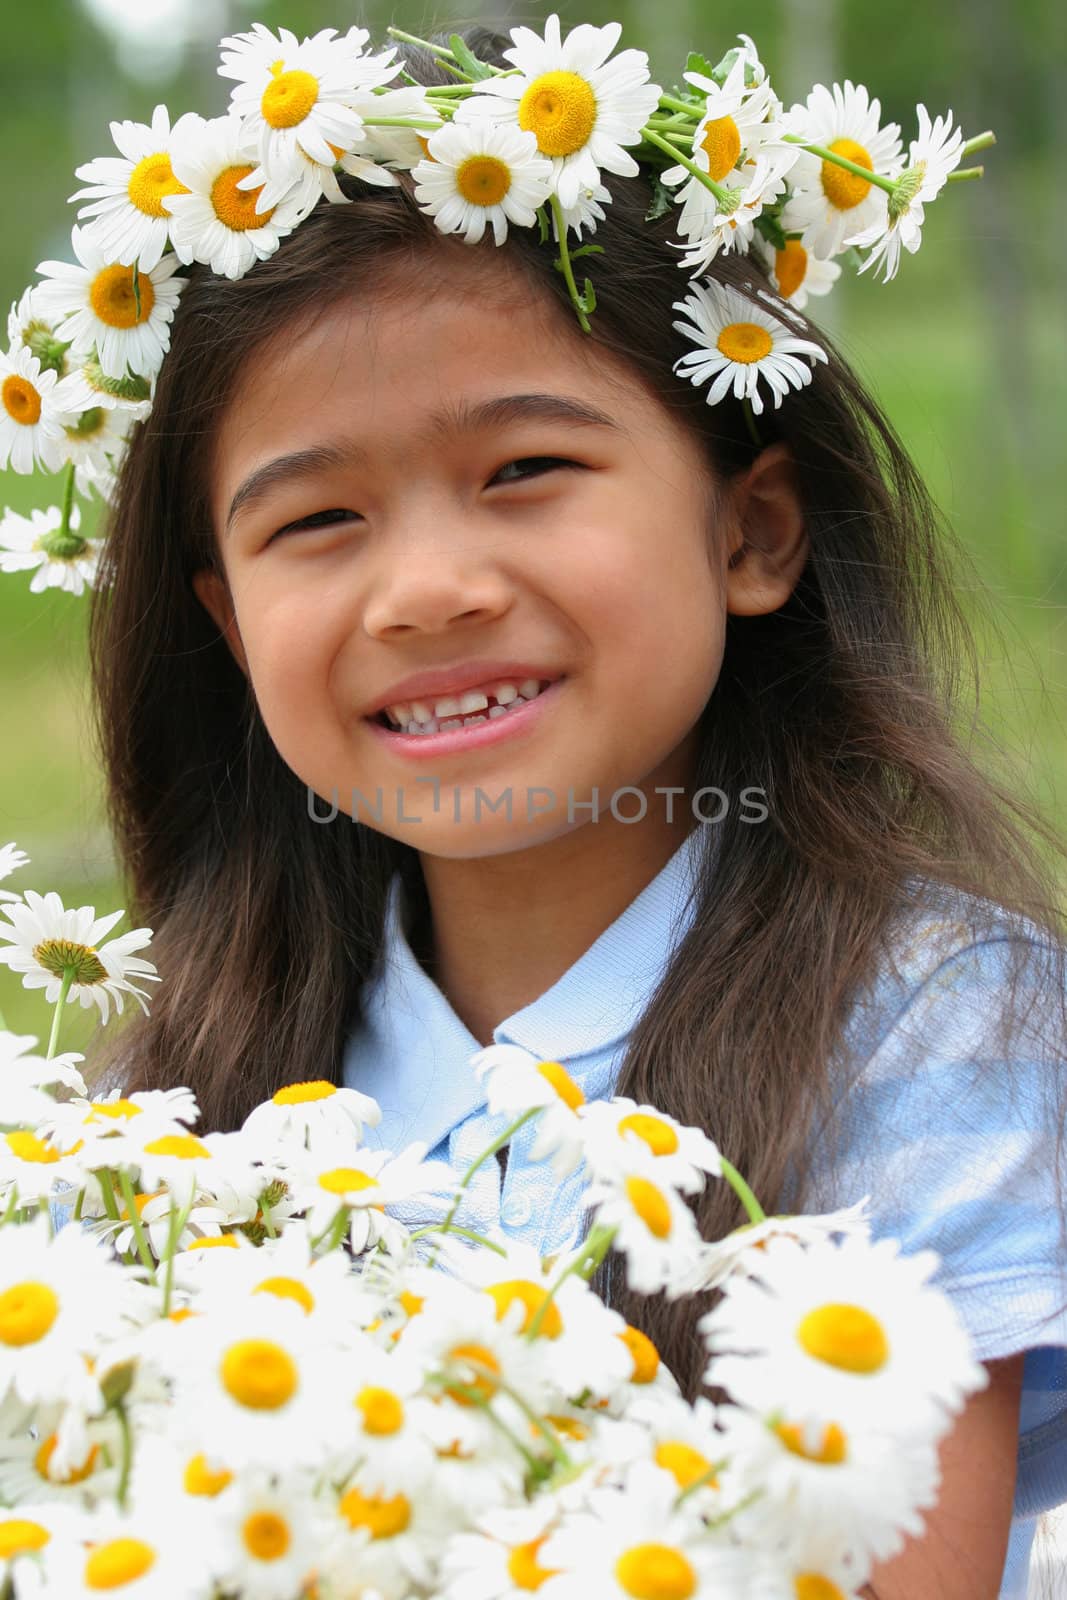 Beautiful little girl with crown of daisies